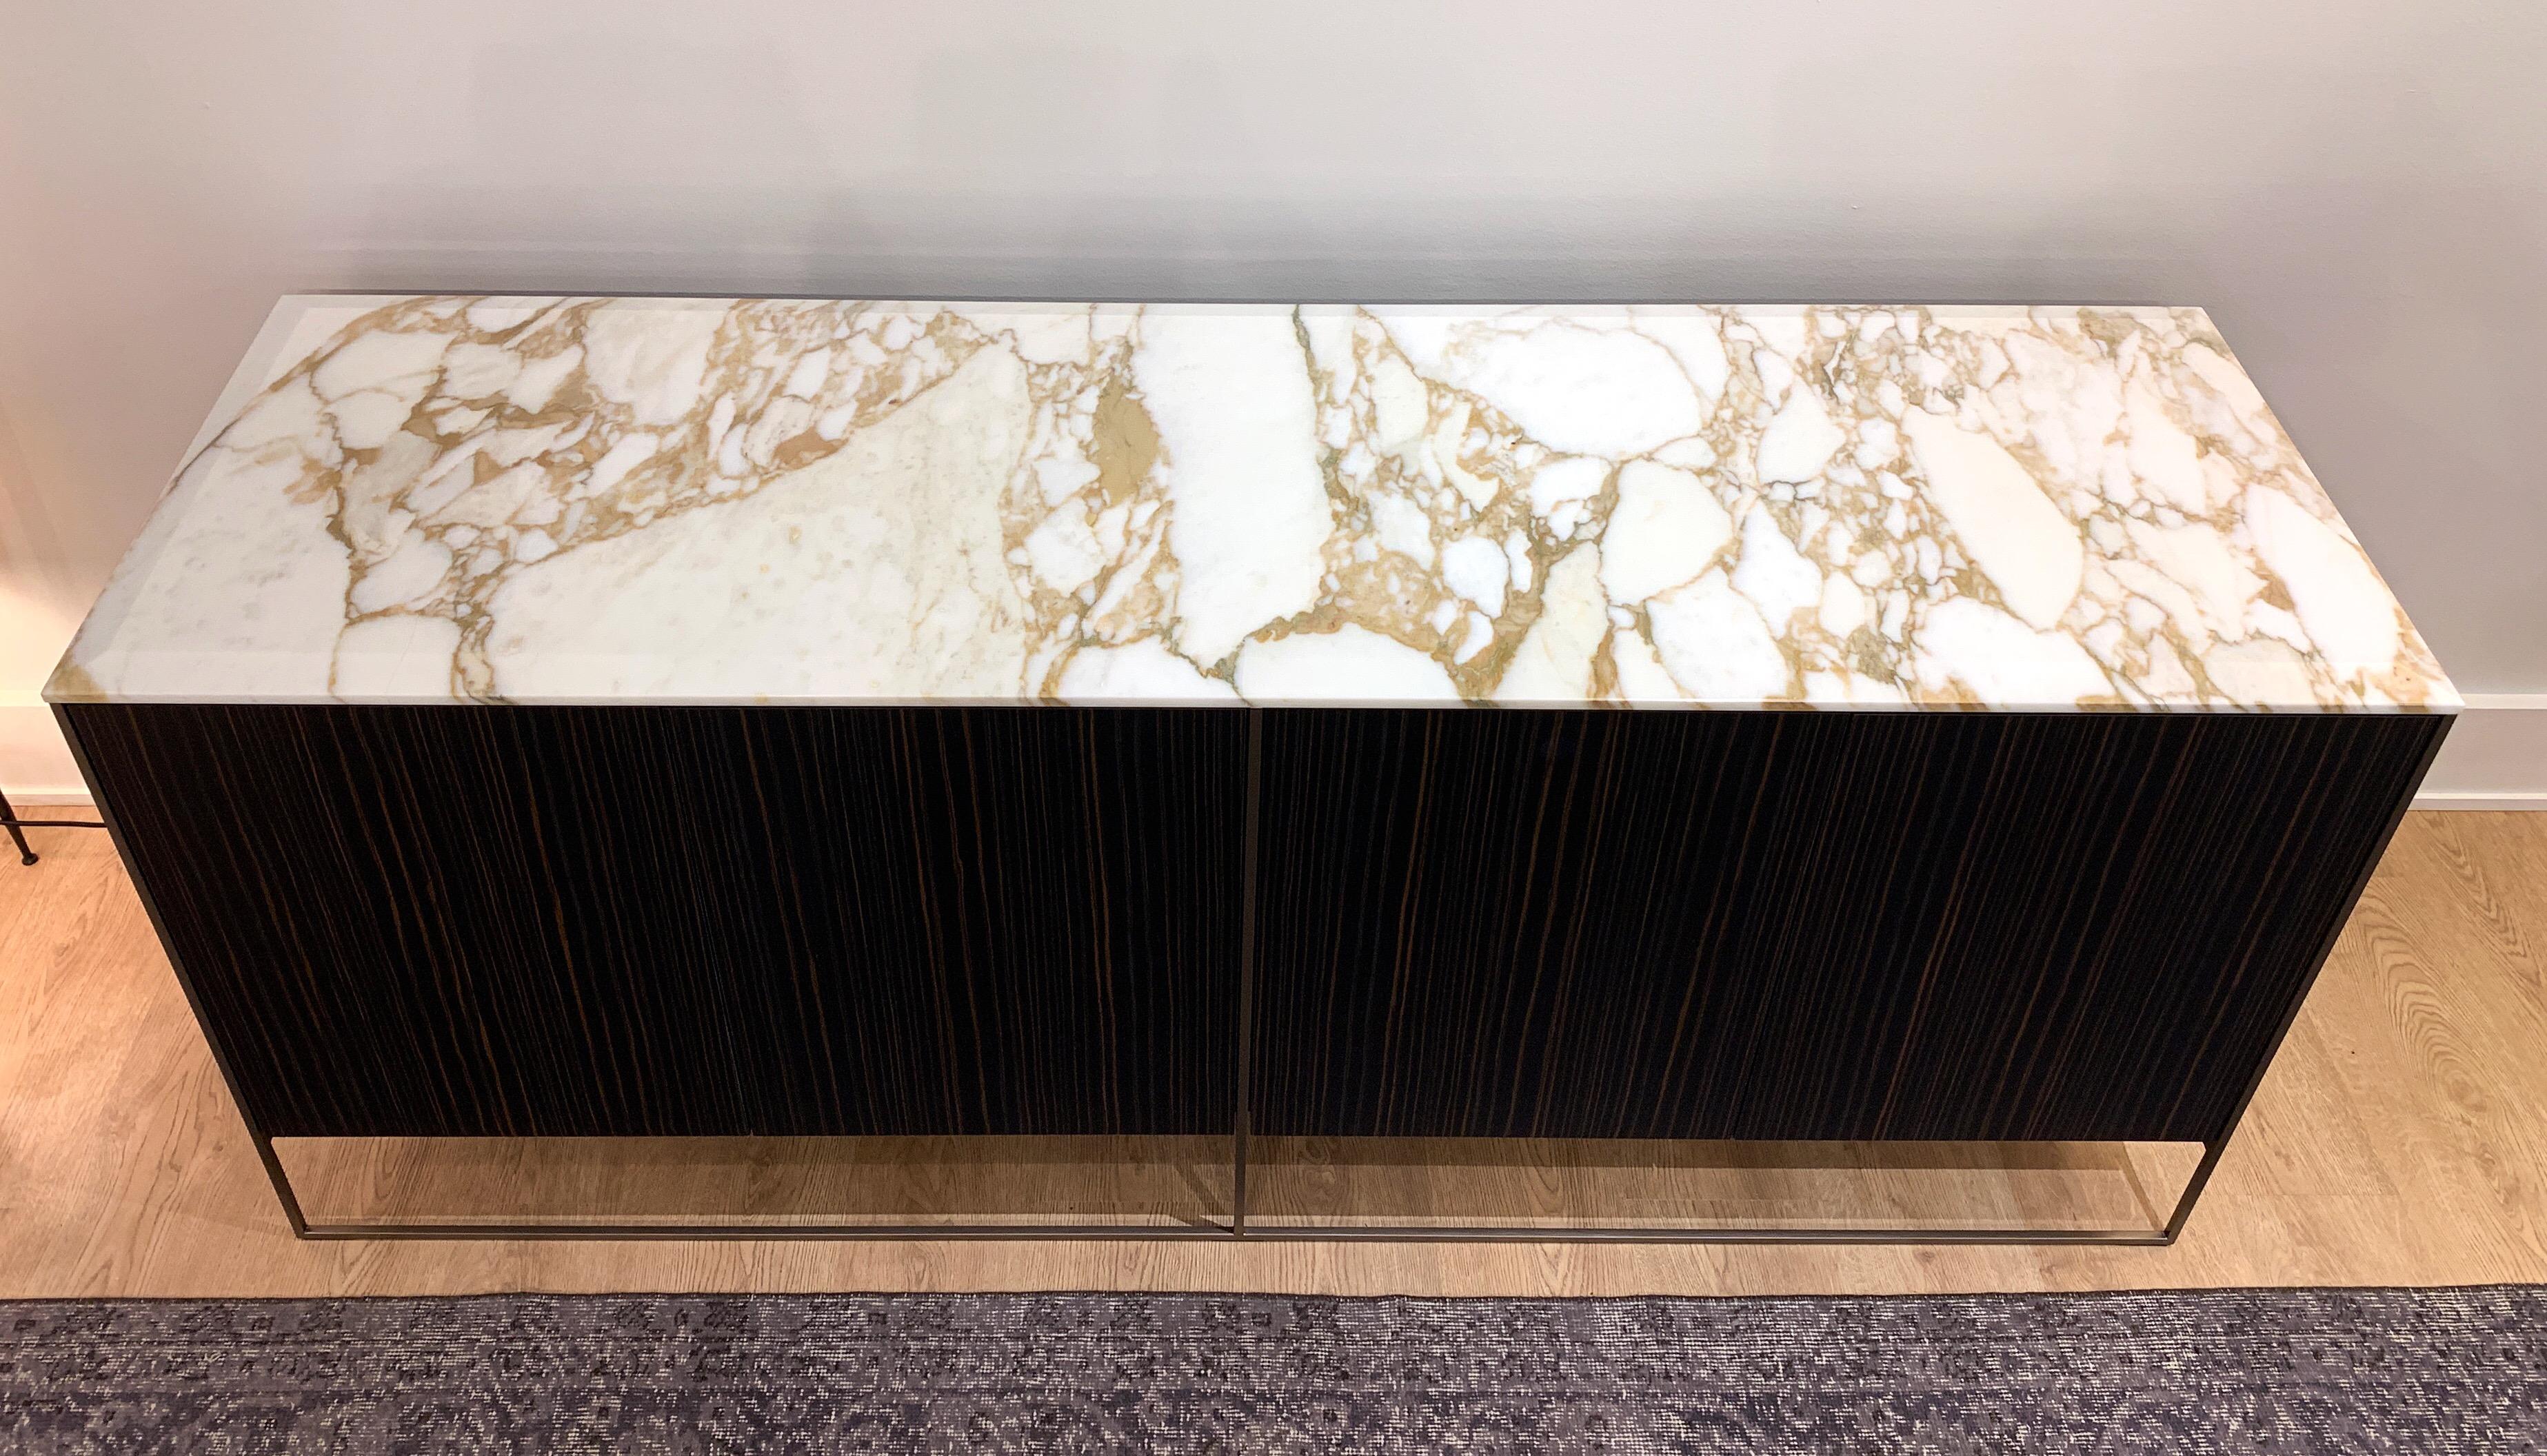 Dining sideboard with Calacatta Gold marble top, Sucupira veneer exterior, with drawers and mirrored interior. Designed by Rodolfo Dordoni for Minotti in 2017.